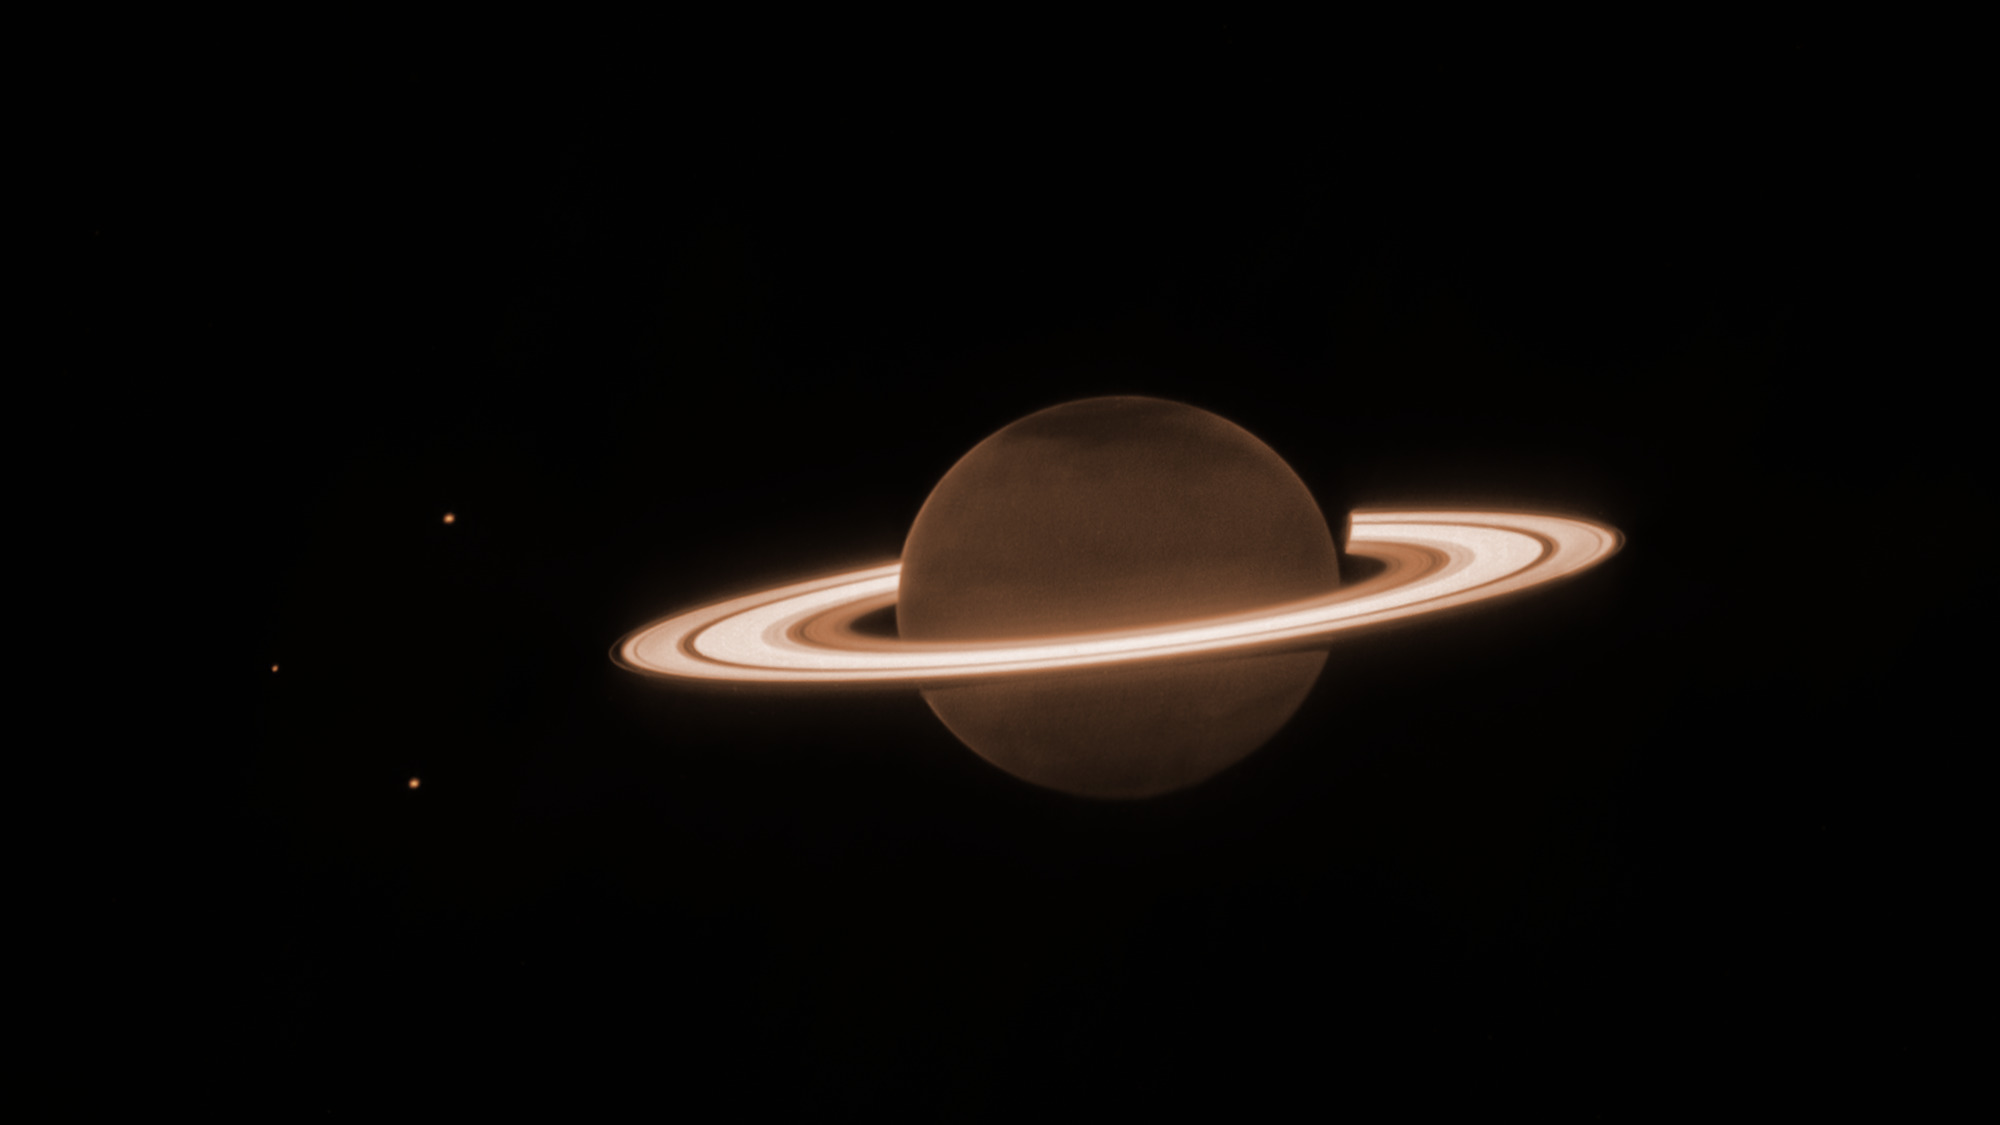 jwst image of saturn, rings, and moons